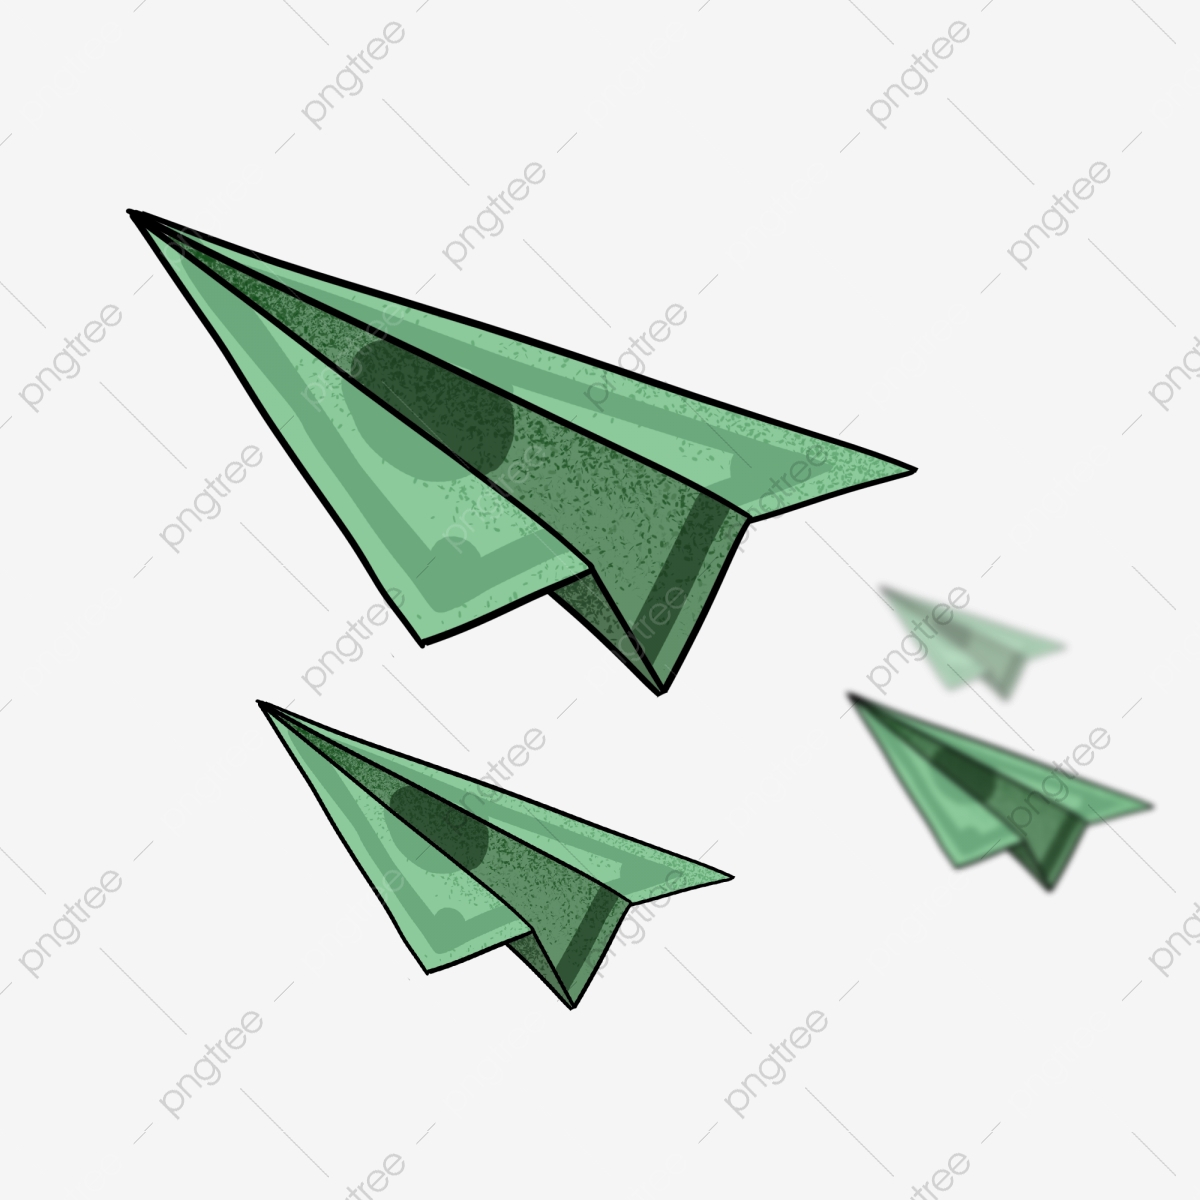 Paper Airplane Origami Aircraft Paper Plane Cartoon Airplane Origami Hand Drawn Airplane